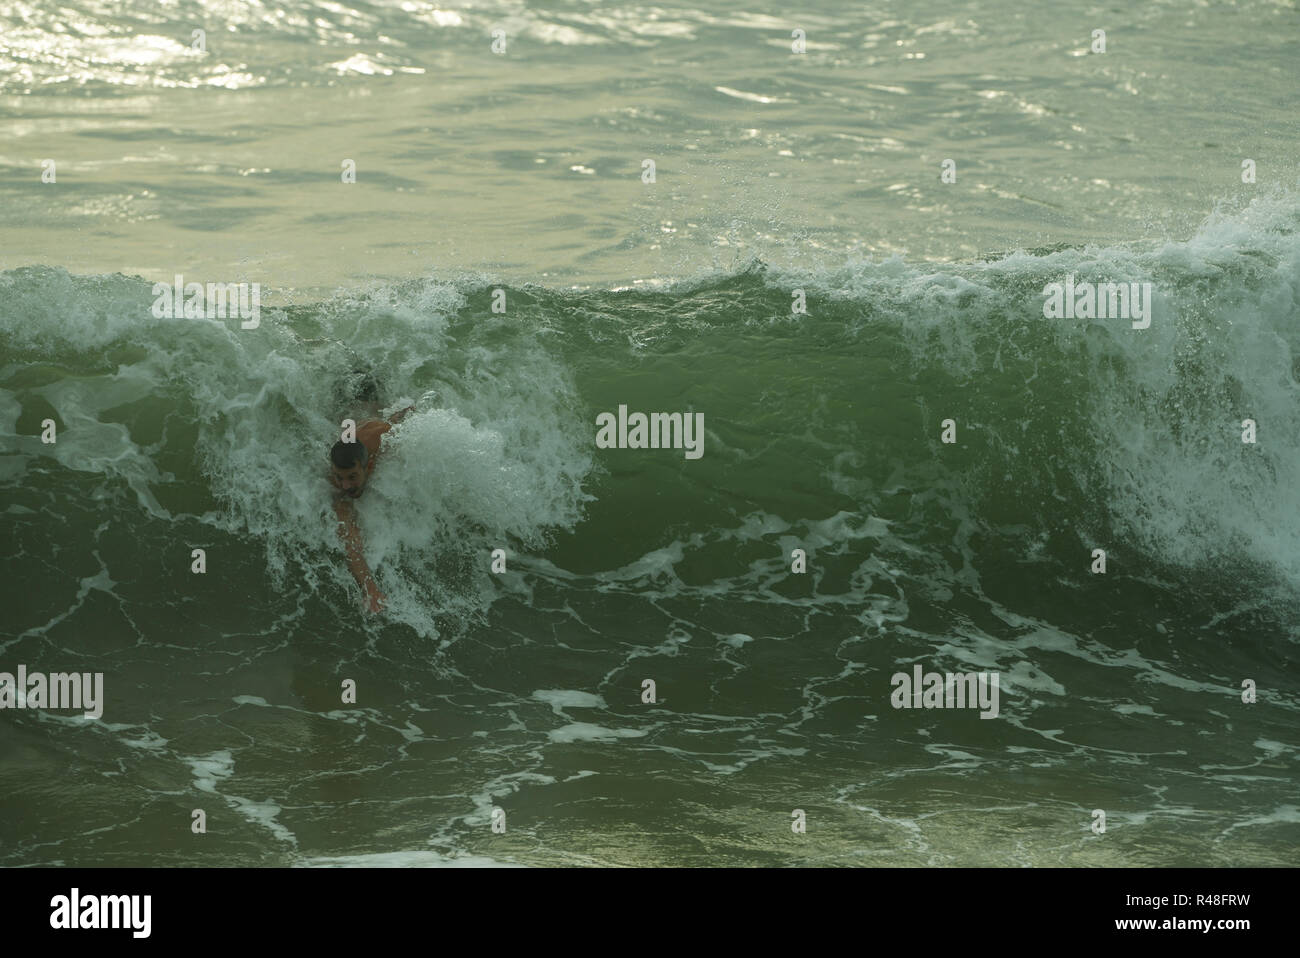 Durban, KwaZulu-Natal, South Africa, single adult male bodysurfer dynamically accelerating down face of breaking wave Stock Photo